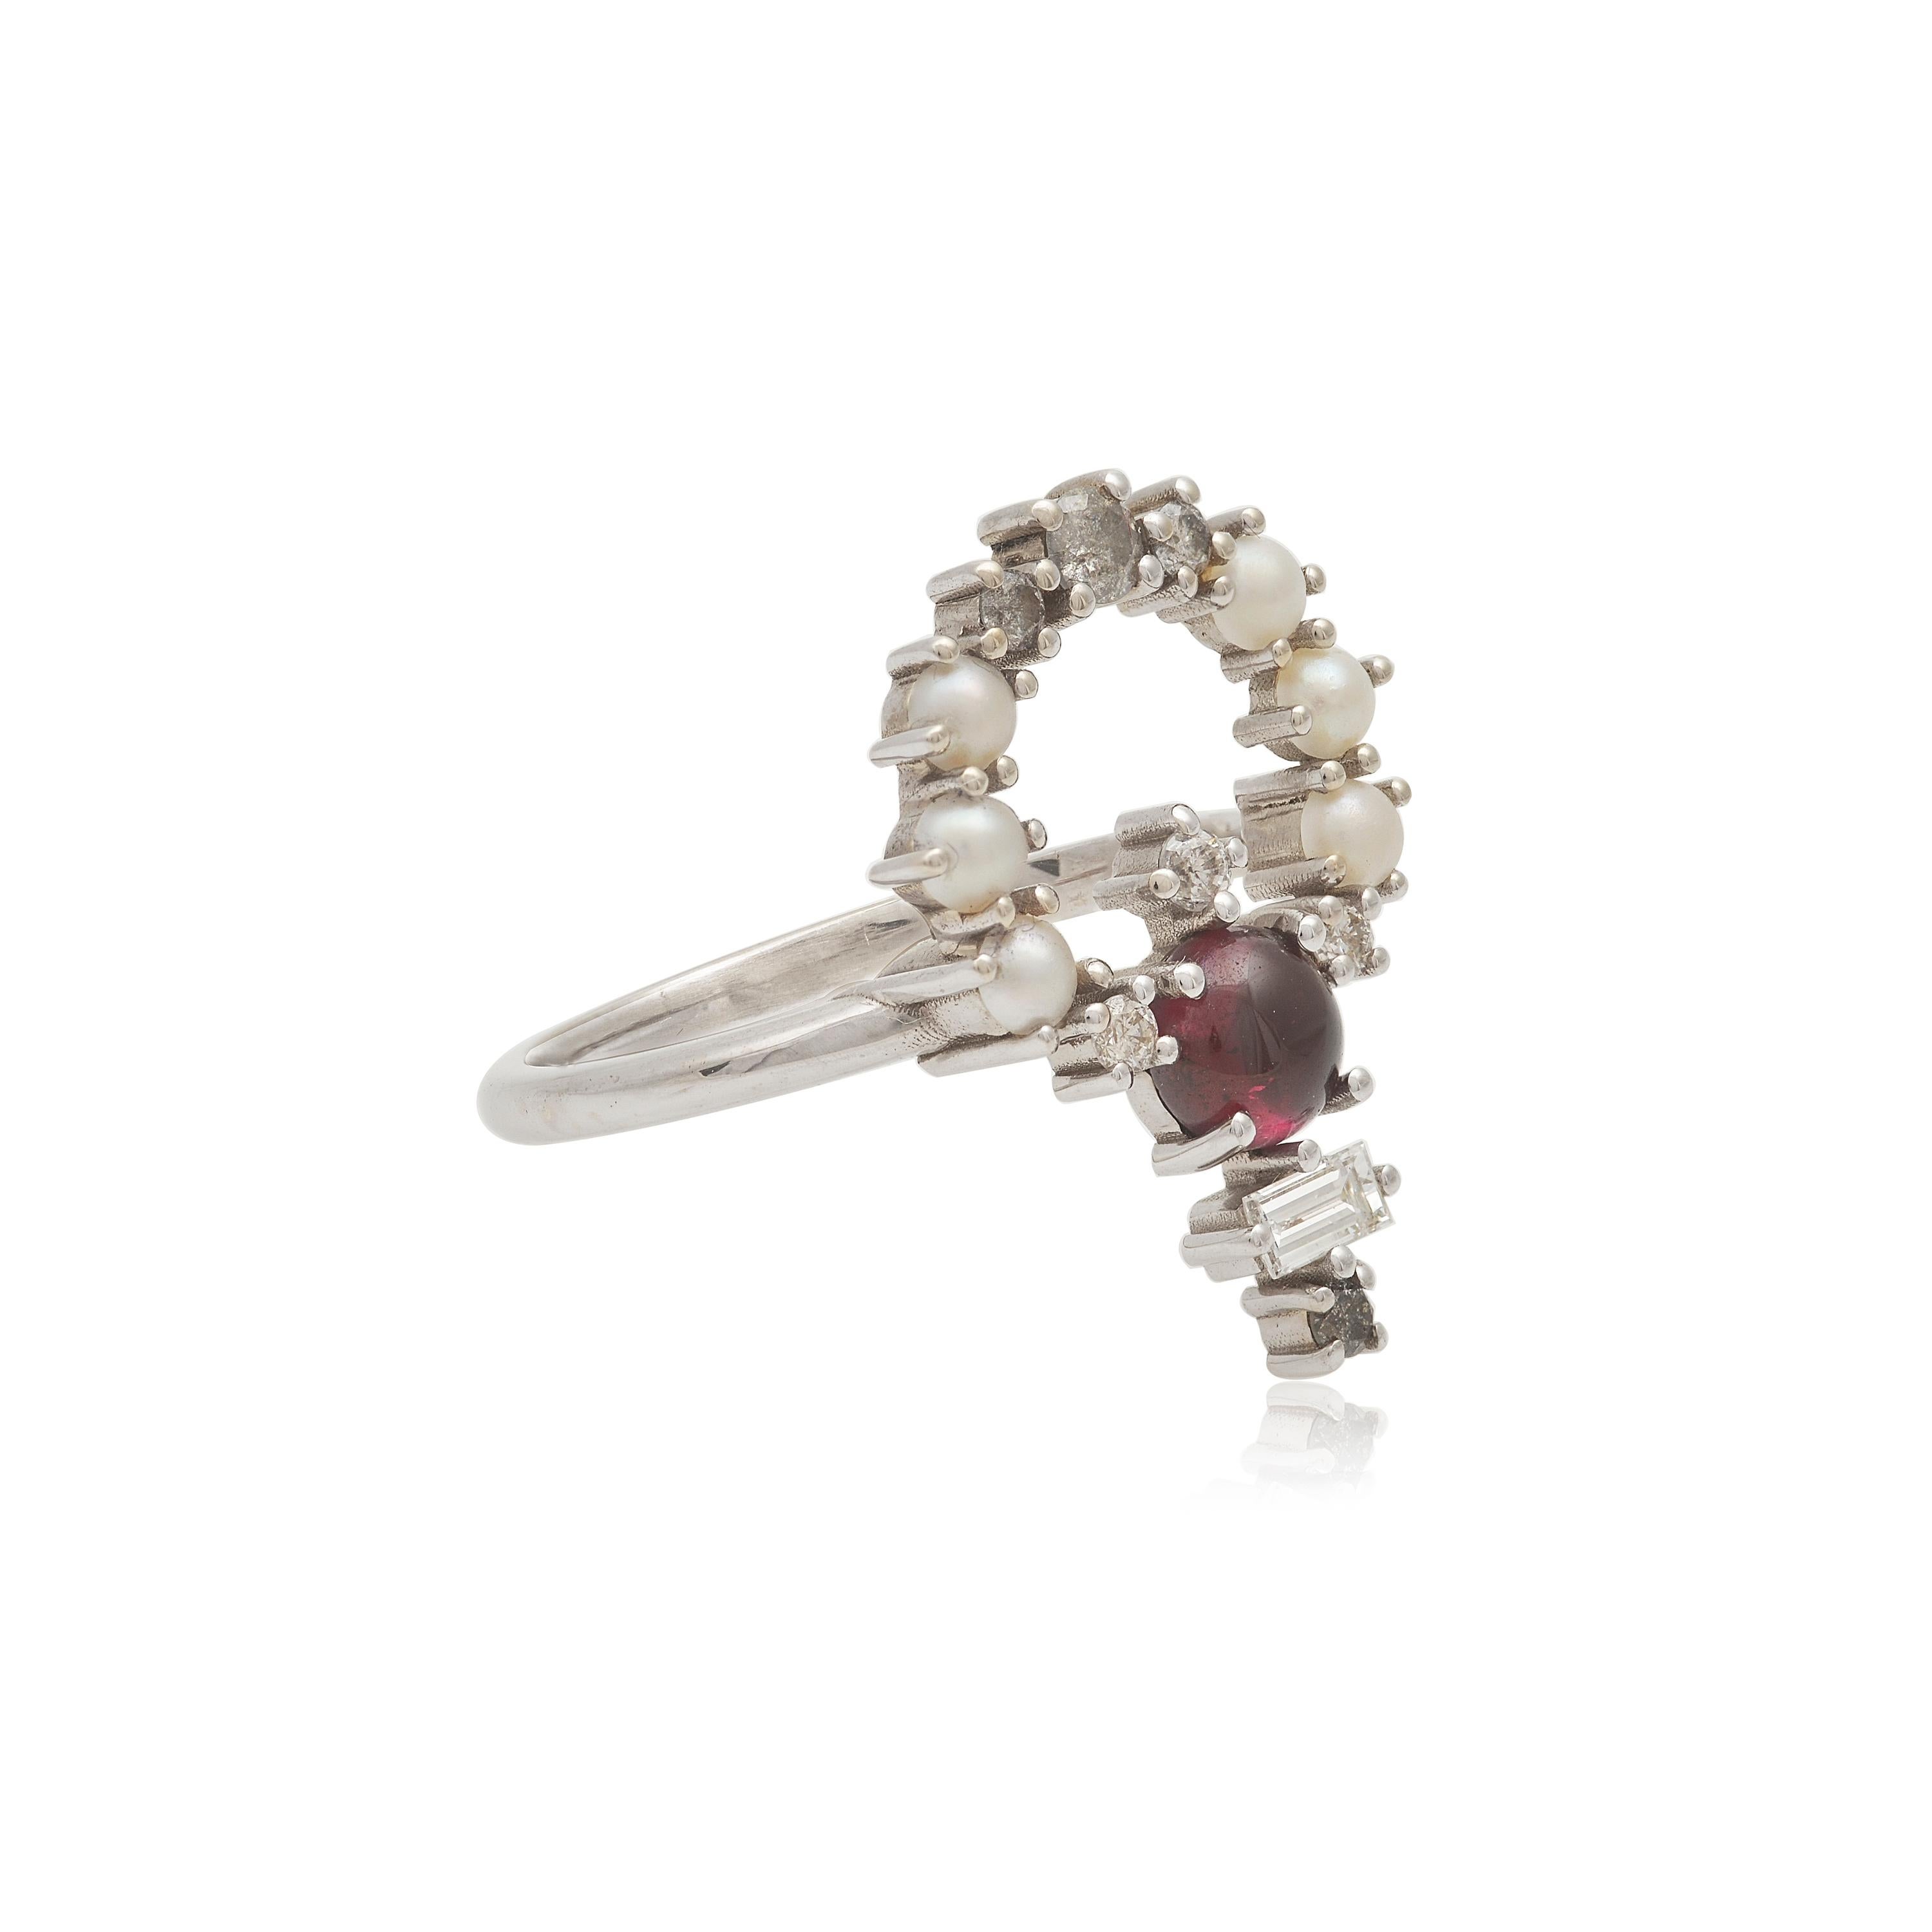 Designer: Alexia Gryllaki
Dimensions: L20x20mm
Ring Size UK N 1/2, US 7 1/2
Weight: approximately 3.4g  
Barcode: OFS043

Multi-stone ring in 18 karat white gold with a round cabochon rhodolite garnet approx. 0.68cts, round cabochon cultured pearls